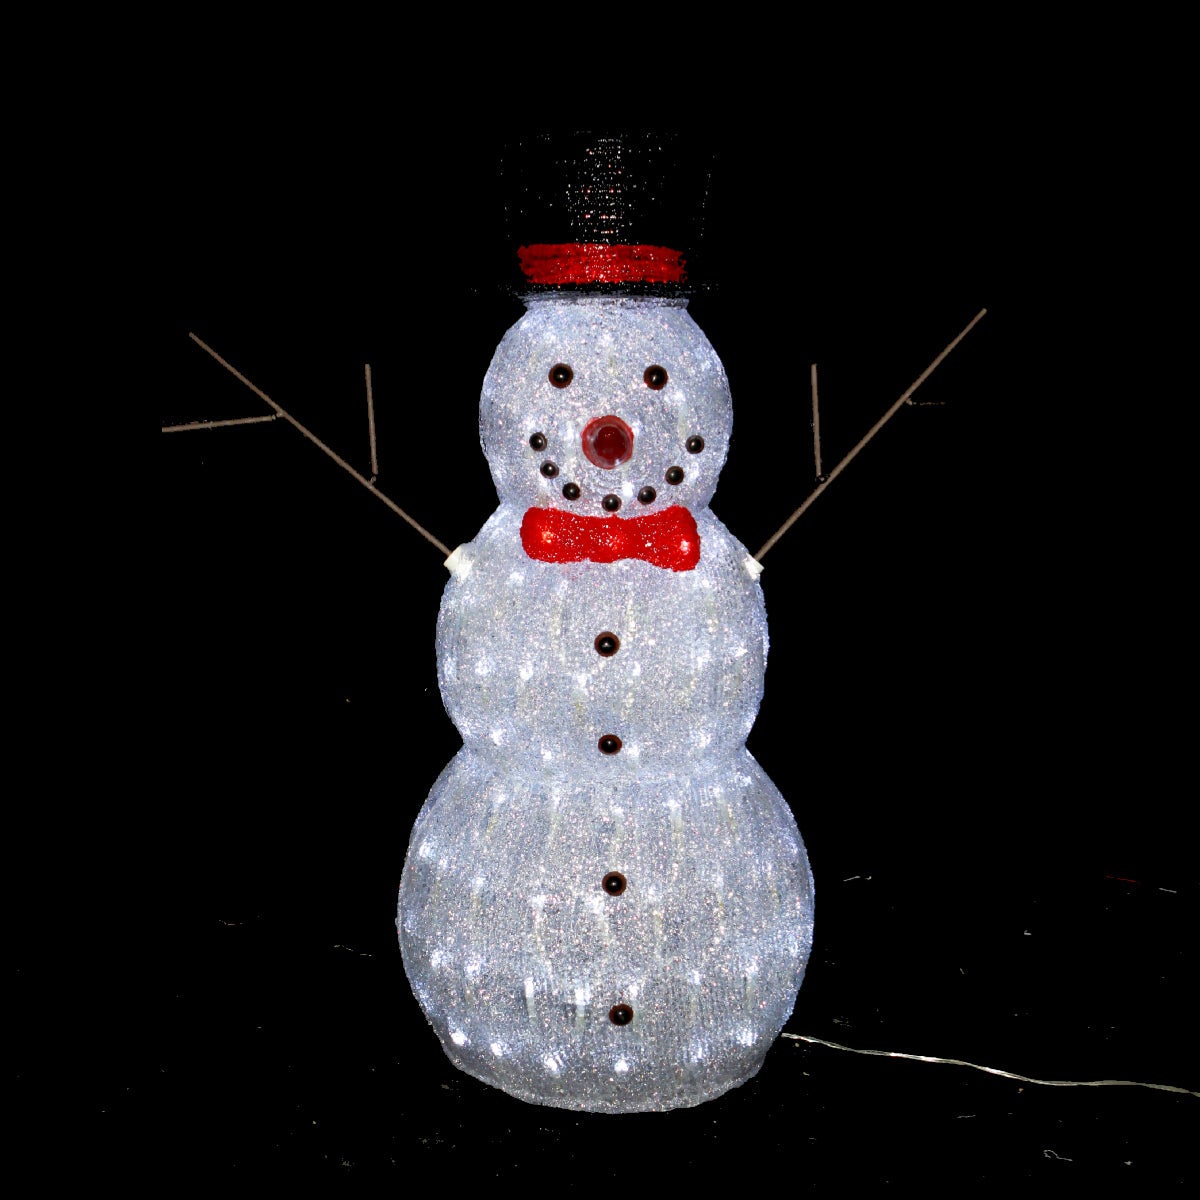 3D Acrylic Snowman 60cm White LED Display Indoor/Outdoor | Buy ...